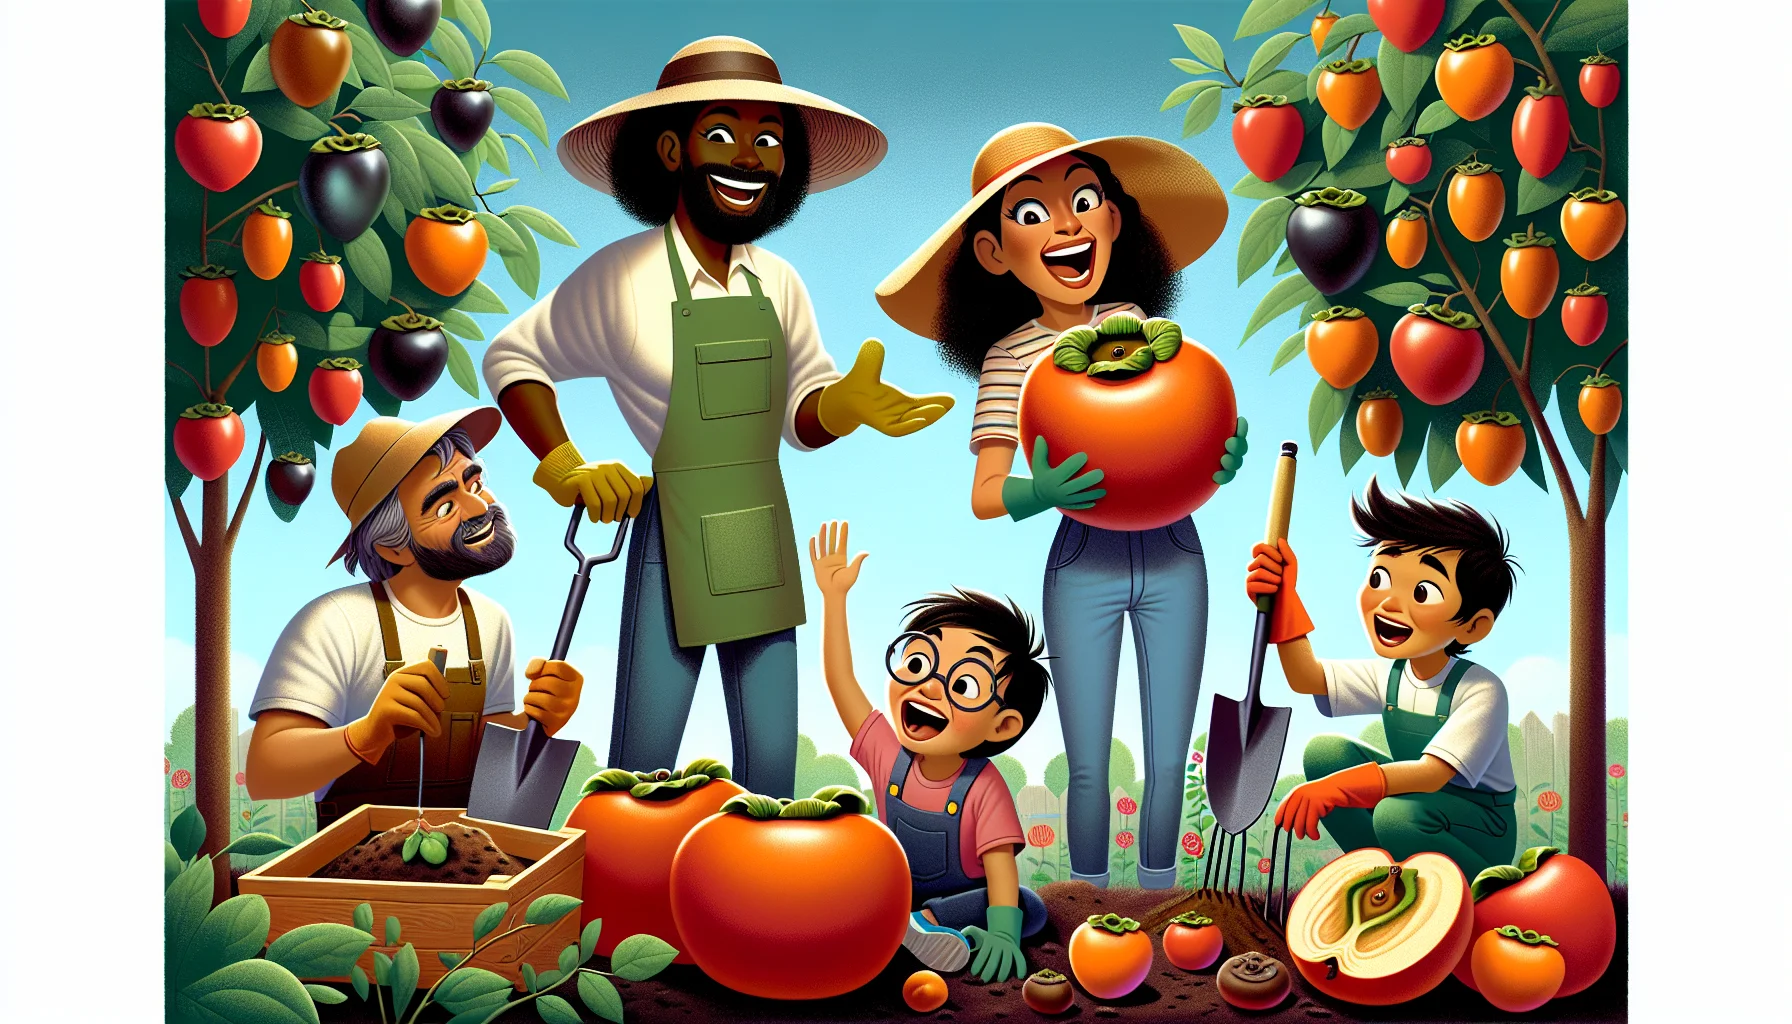 A humorous and enticing image showcasing a garden scene with multiple types of persimmons. In the center, an African American woman, full of enthusiasm and wearing a sun hat and gloves, chats with a Caucasian man holding a trowel and a persimmon while a South Asian child excitedly holds up a large Hachiya persimmon. To one side, a Middle Eastern teenager busily plants a new persimmon tree. All around are full-grown trees with different persimmon fruits like Fuyu, American, and Black Persimmons rich in color and diversity, conveying the joy of gardening.